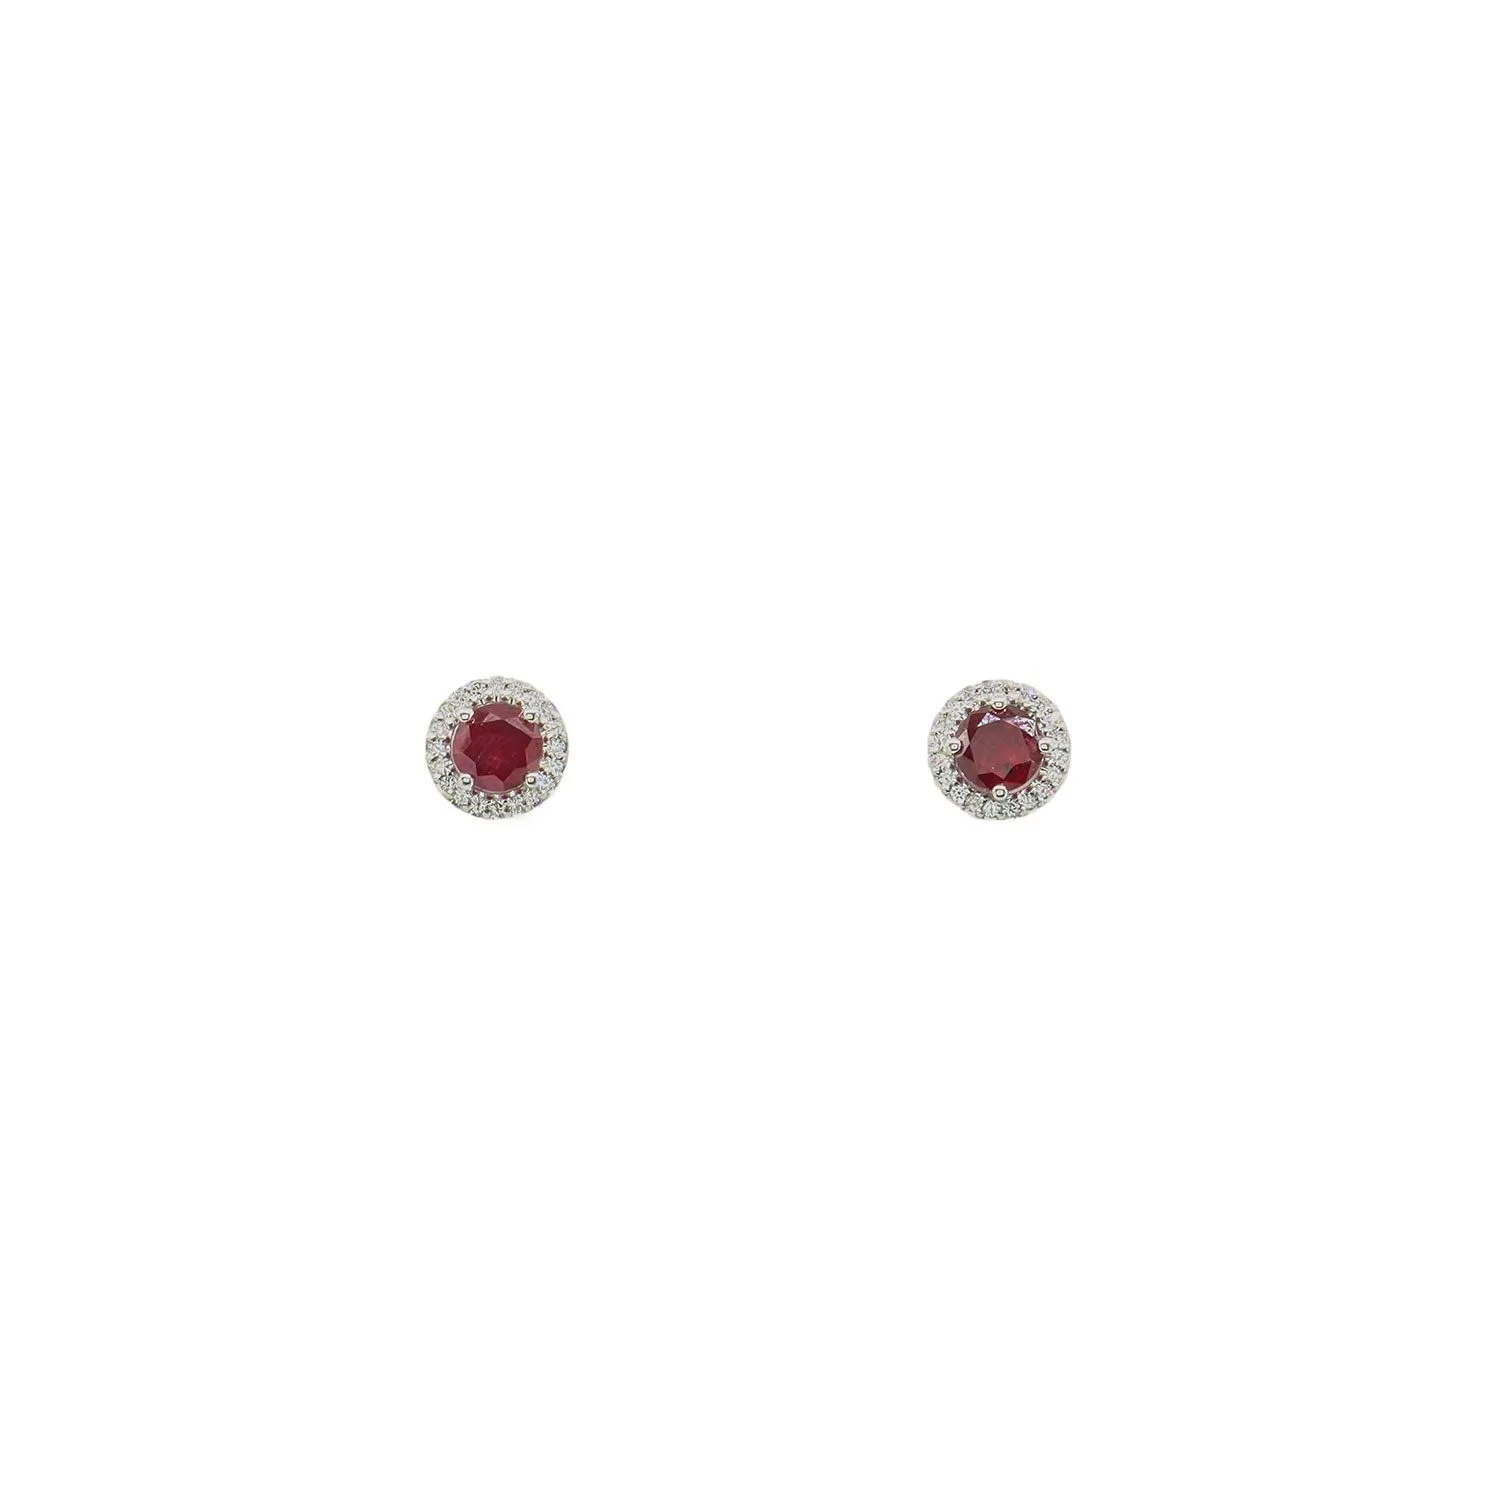 The Chita earrings are made of ruby ​​and diamonds